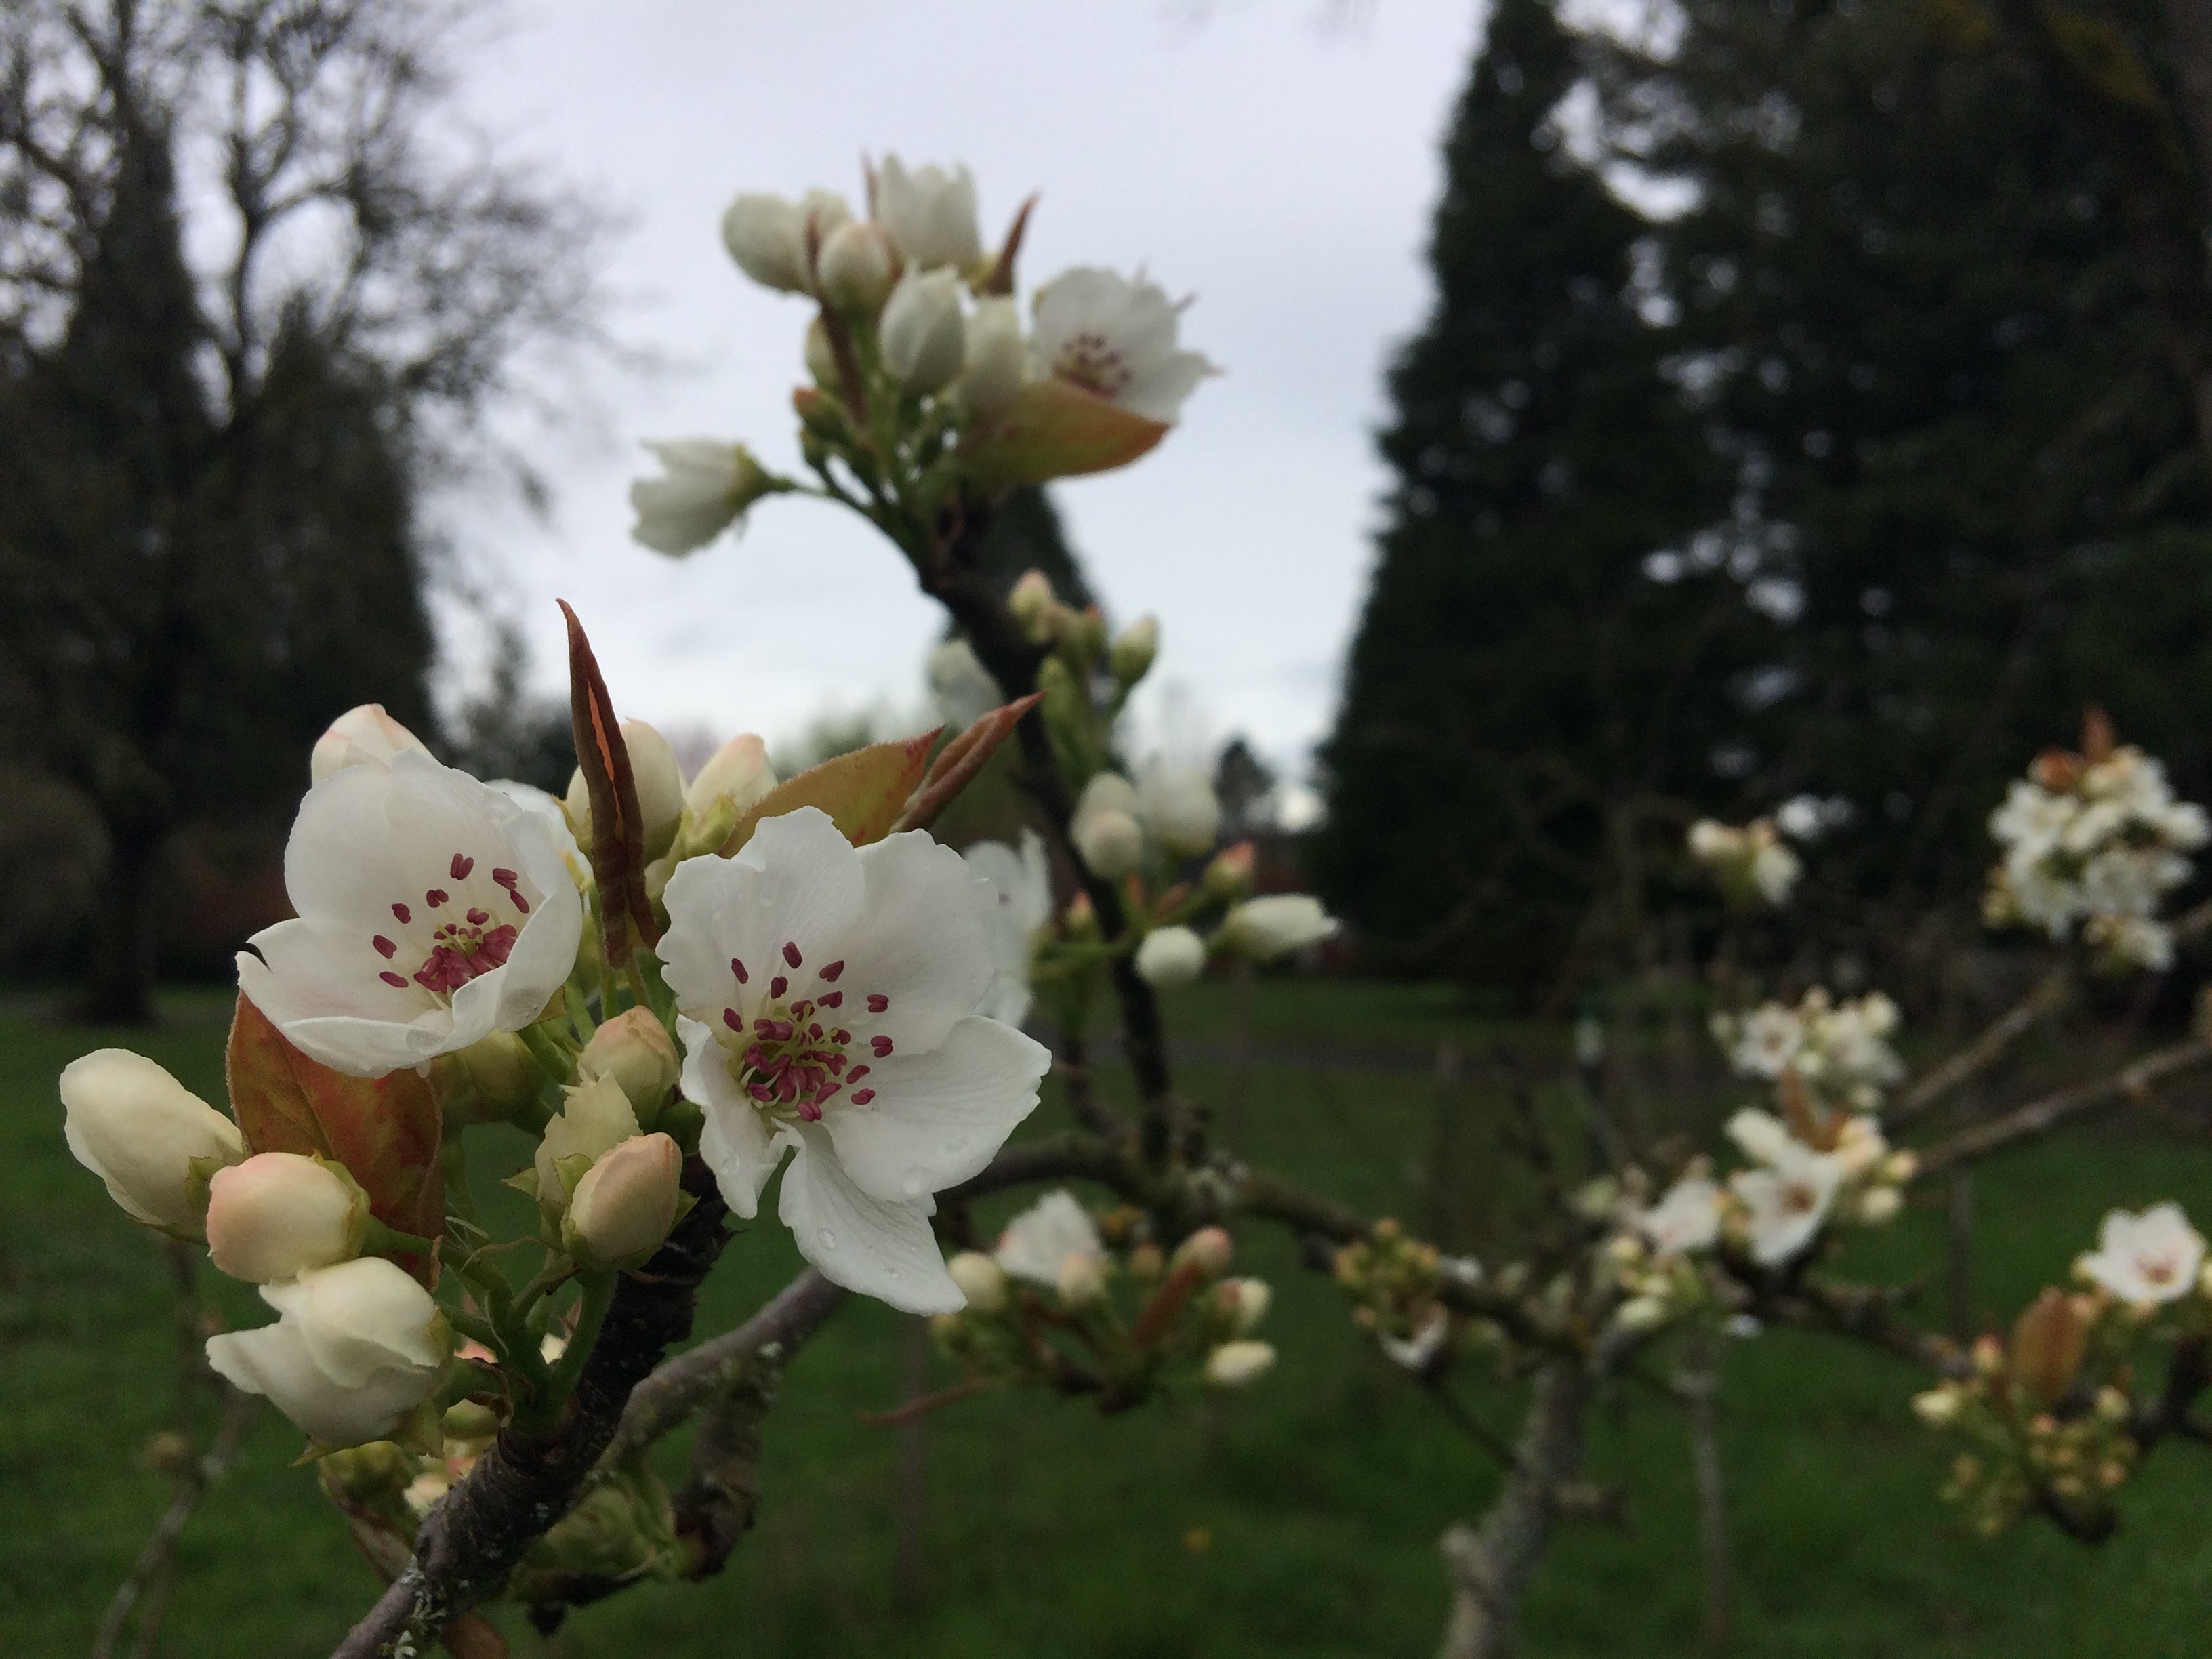 Orchard blooms